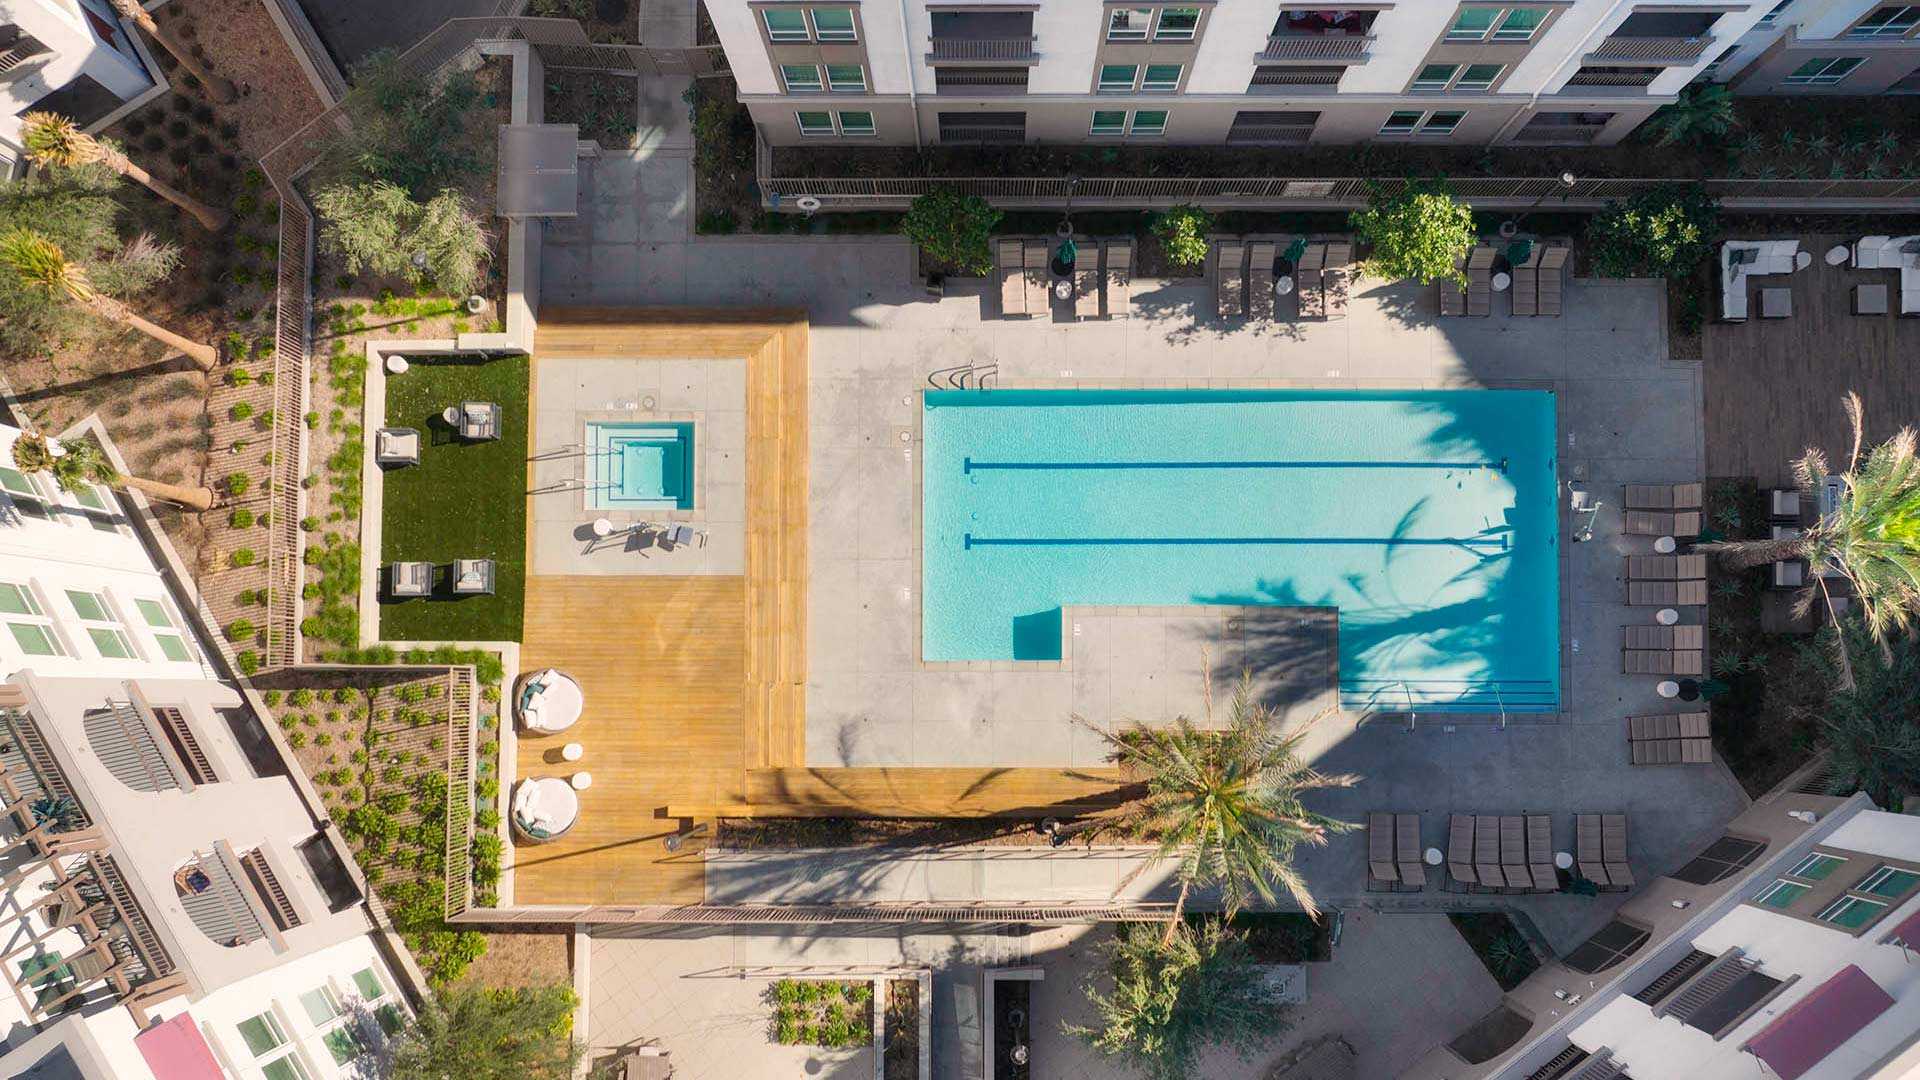 Upland pool aerial view 1